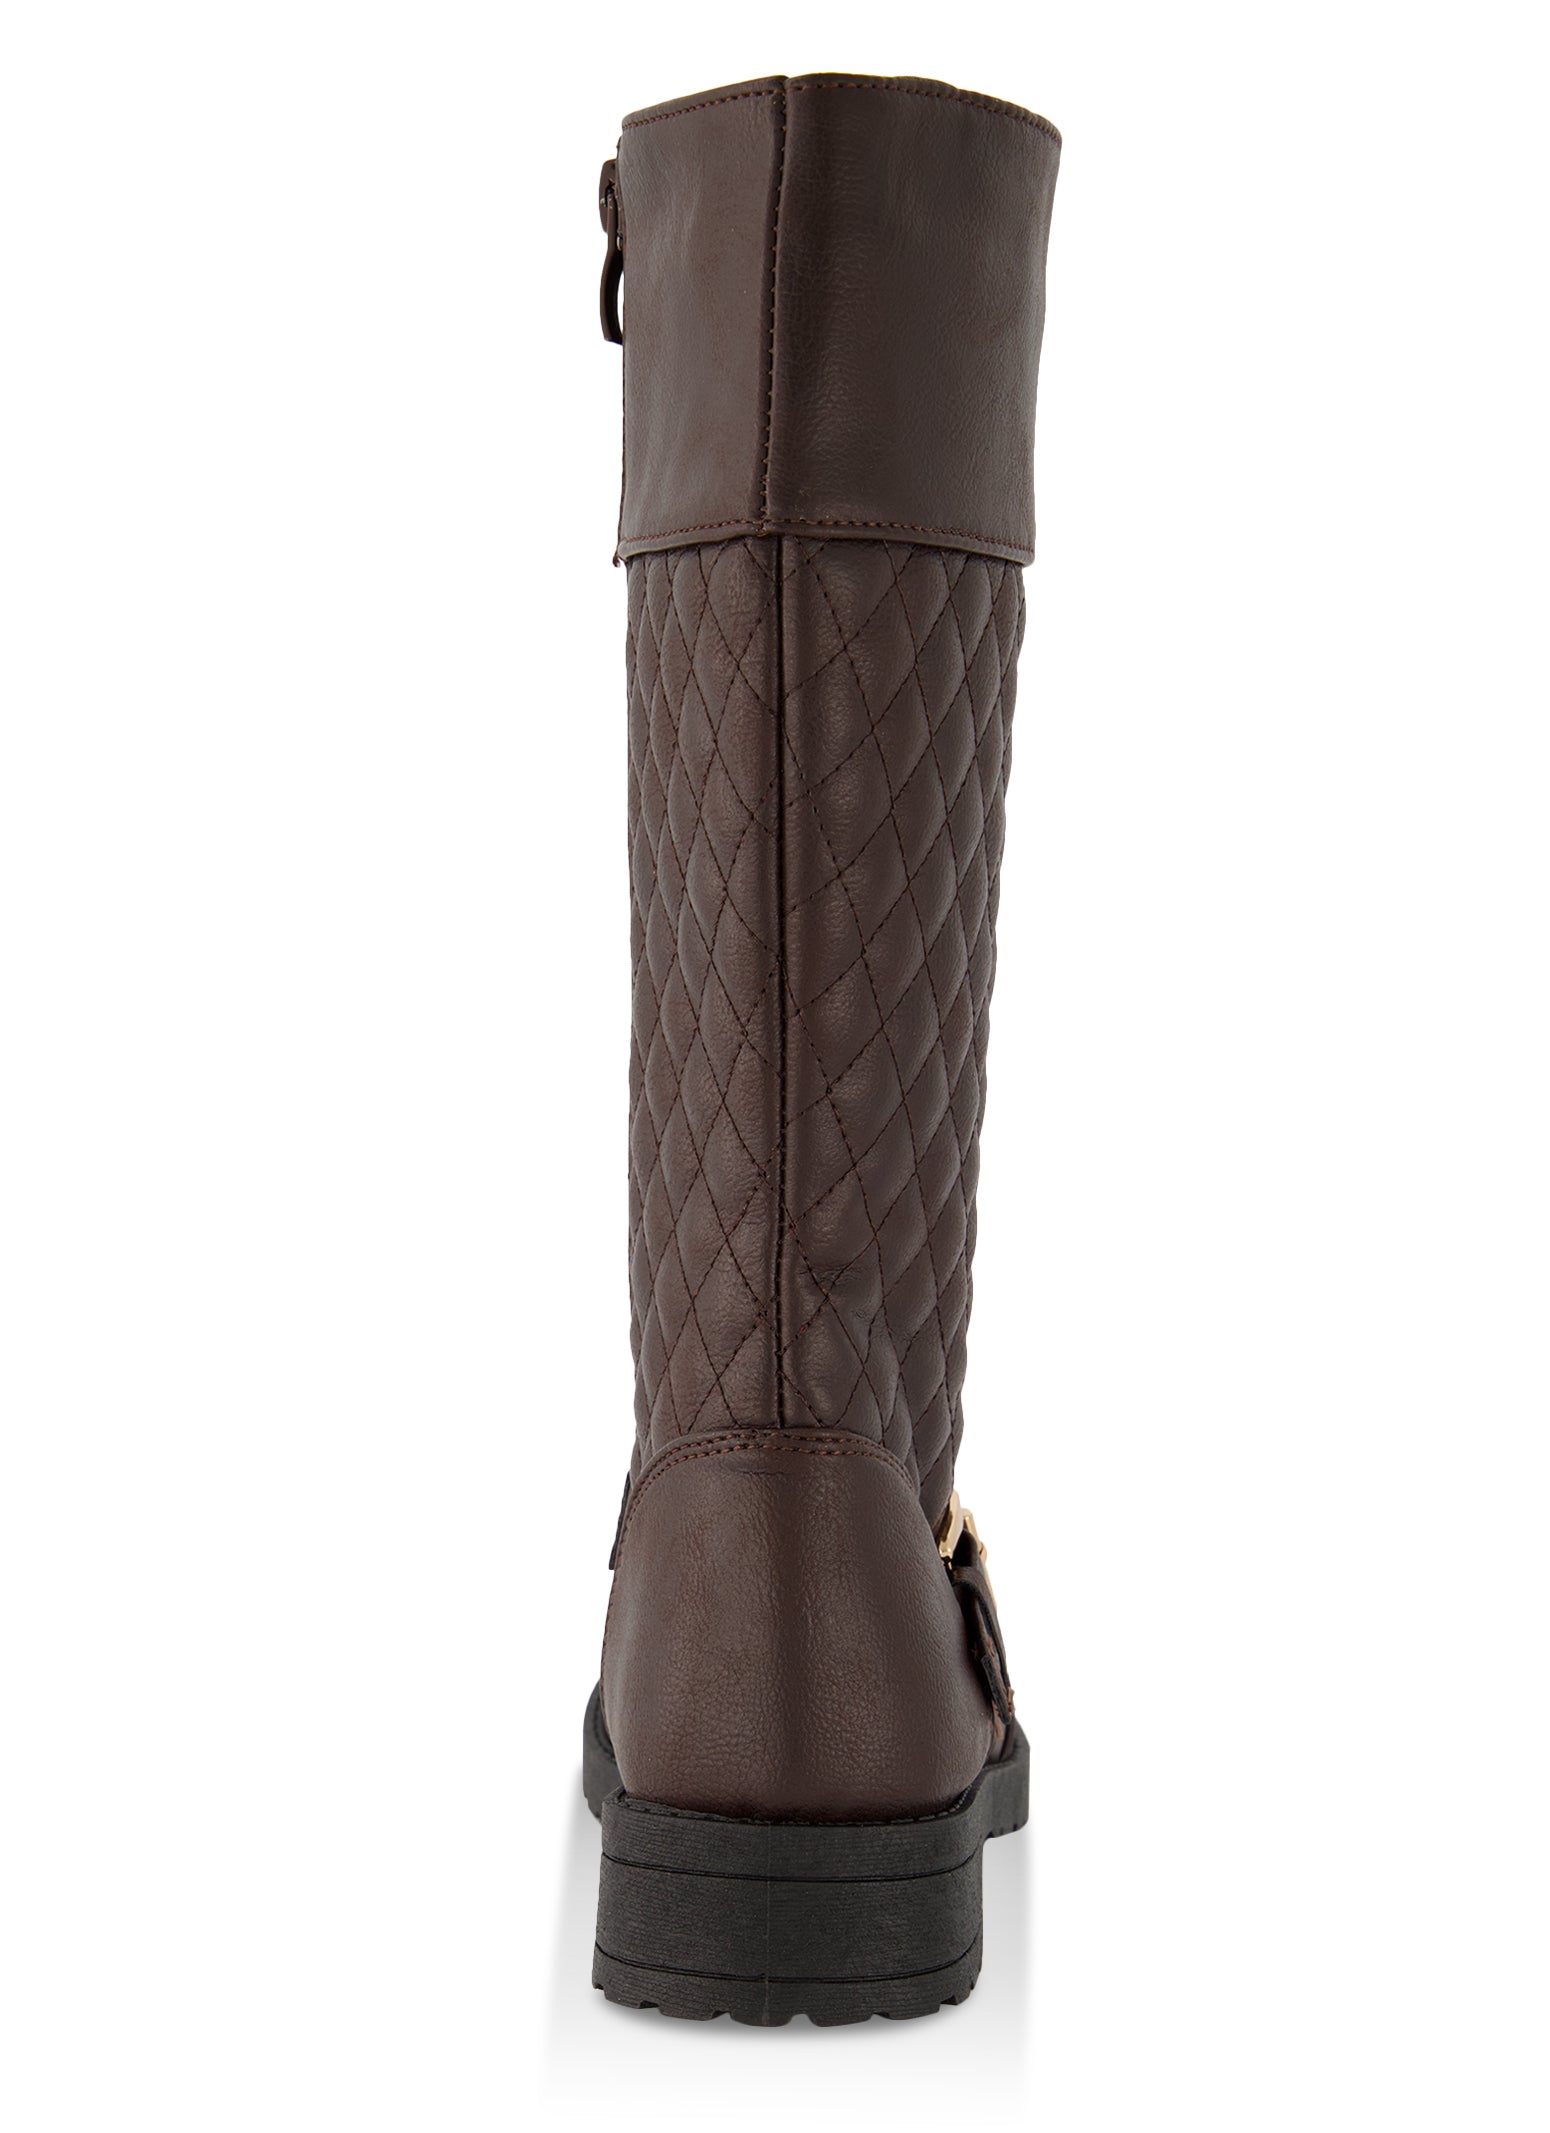 Girls Quilted Tall Buckle Boots